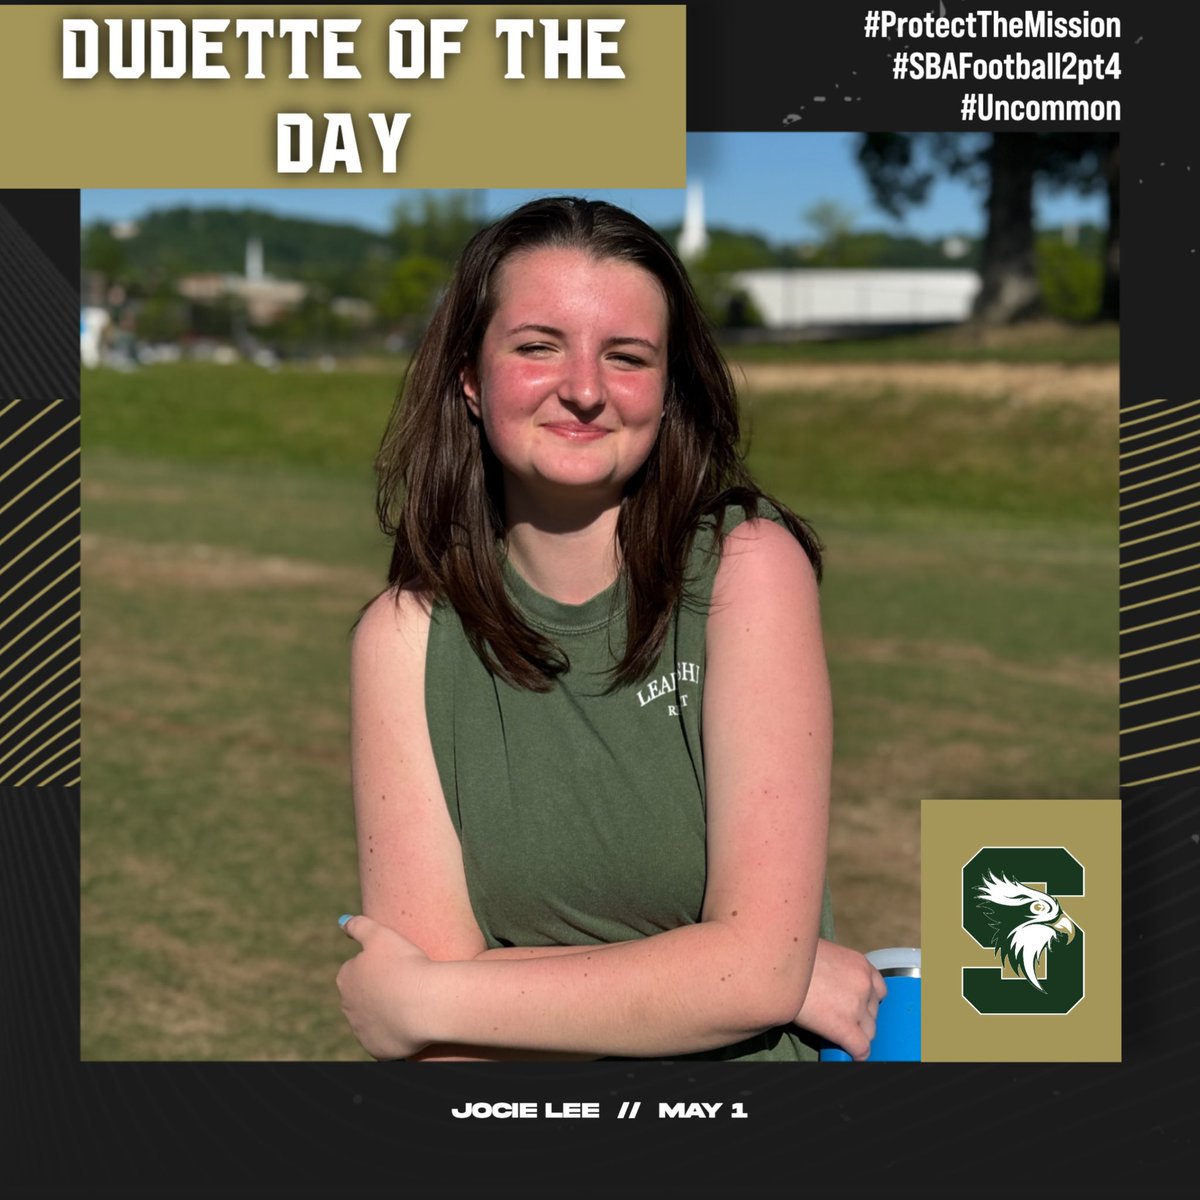 Talk about laying it on the line 4 the team! Our first Dudette of 2.4! She is doing all she can to serve her team! Today she has the battle scare to prove it! U are helping us Protect The Mission!!
#SBAFootball2pt4 #UNCOMMON #Built2BDifferent #BeMore4Others #ProtectTheMission